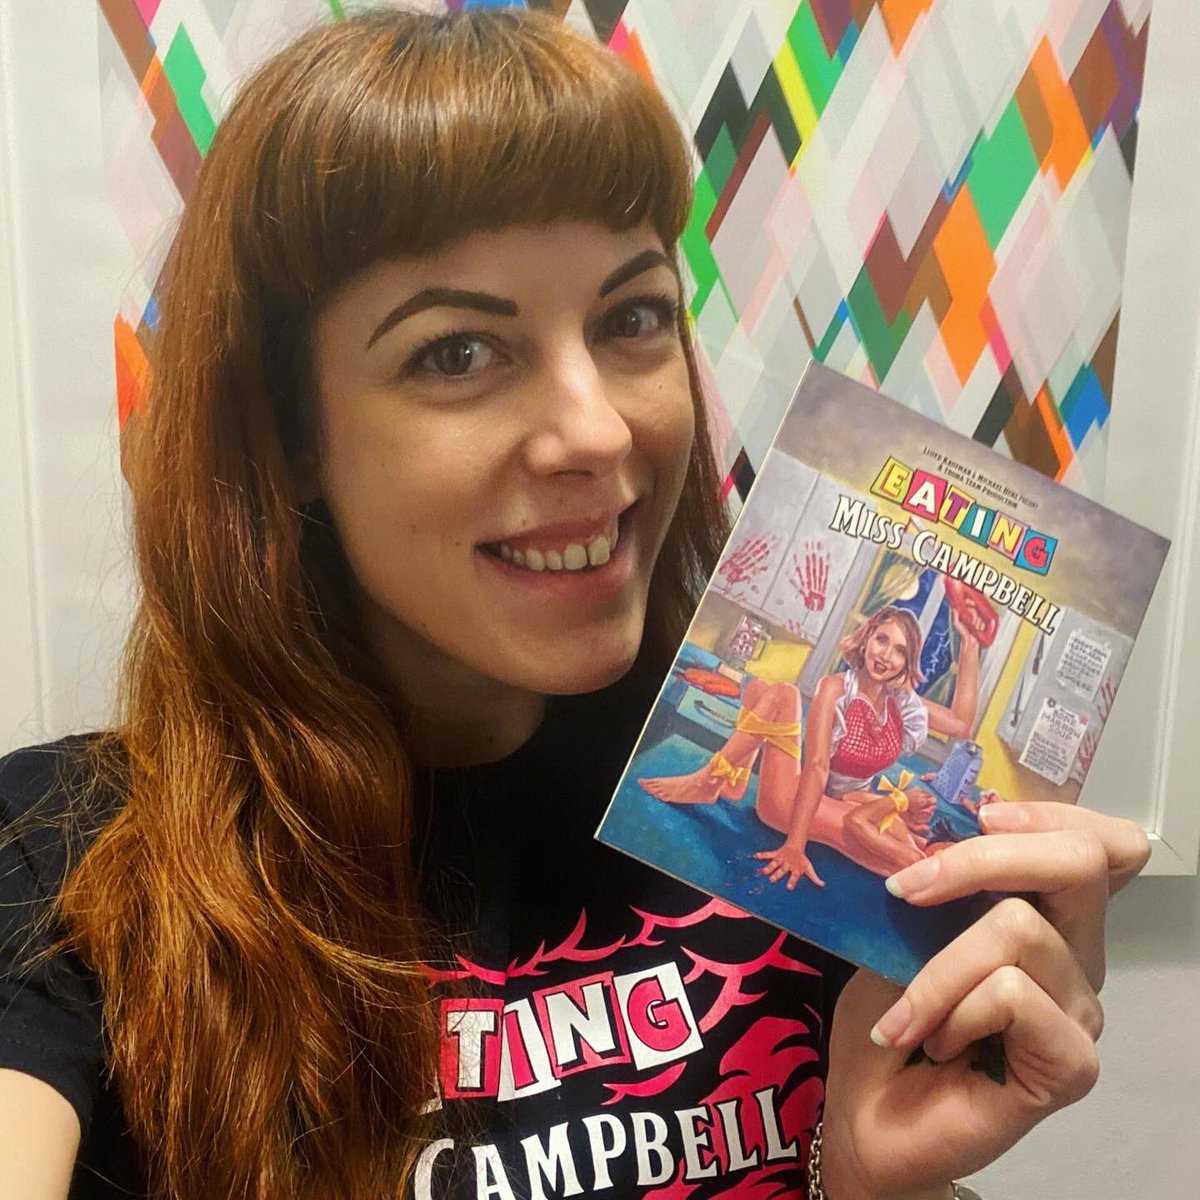 Over 50% of Eating Miss Campbell Blu-rays SOLD! Only 2,500 manufactured with numbered & signed slipcover. Buy yours today at refusefilms.com 📀 💜